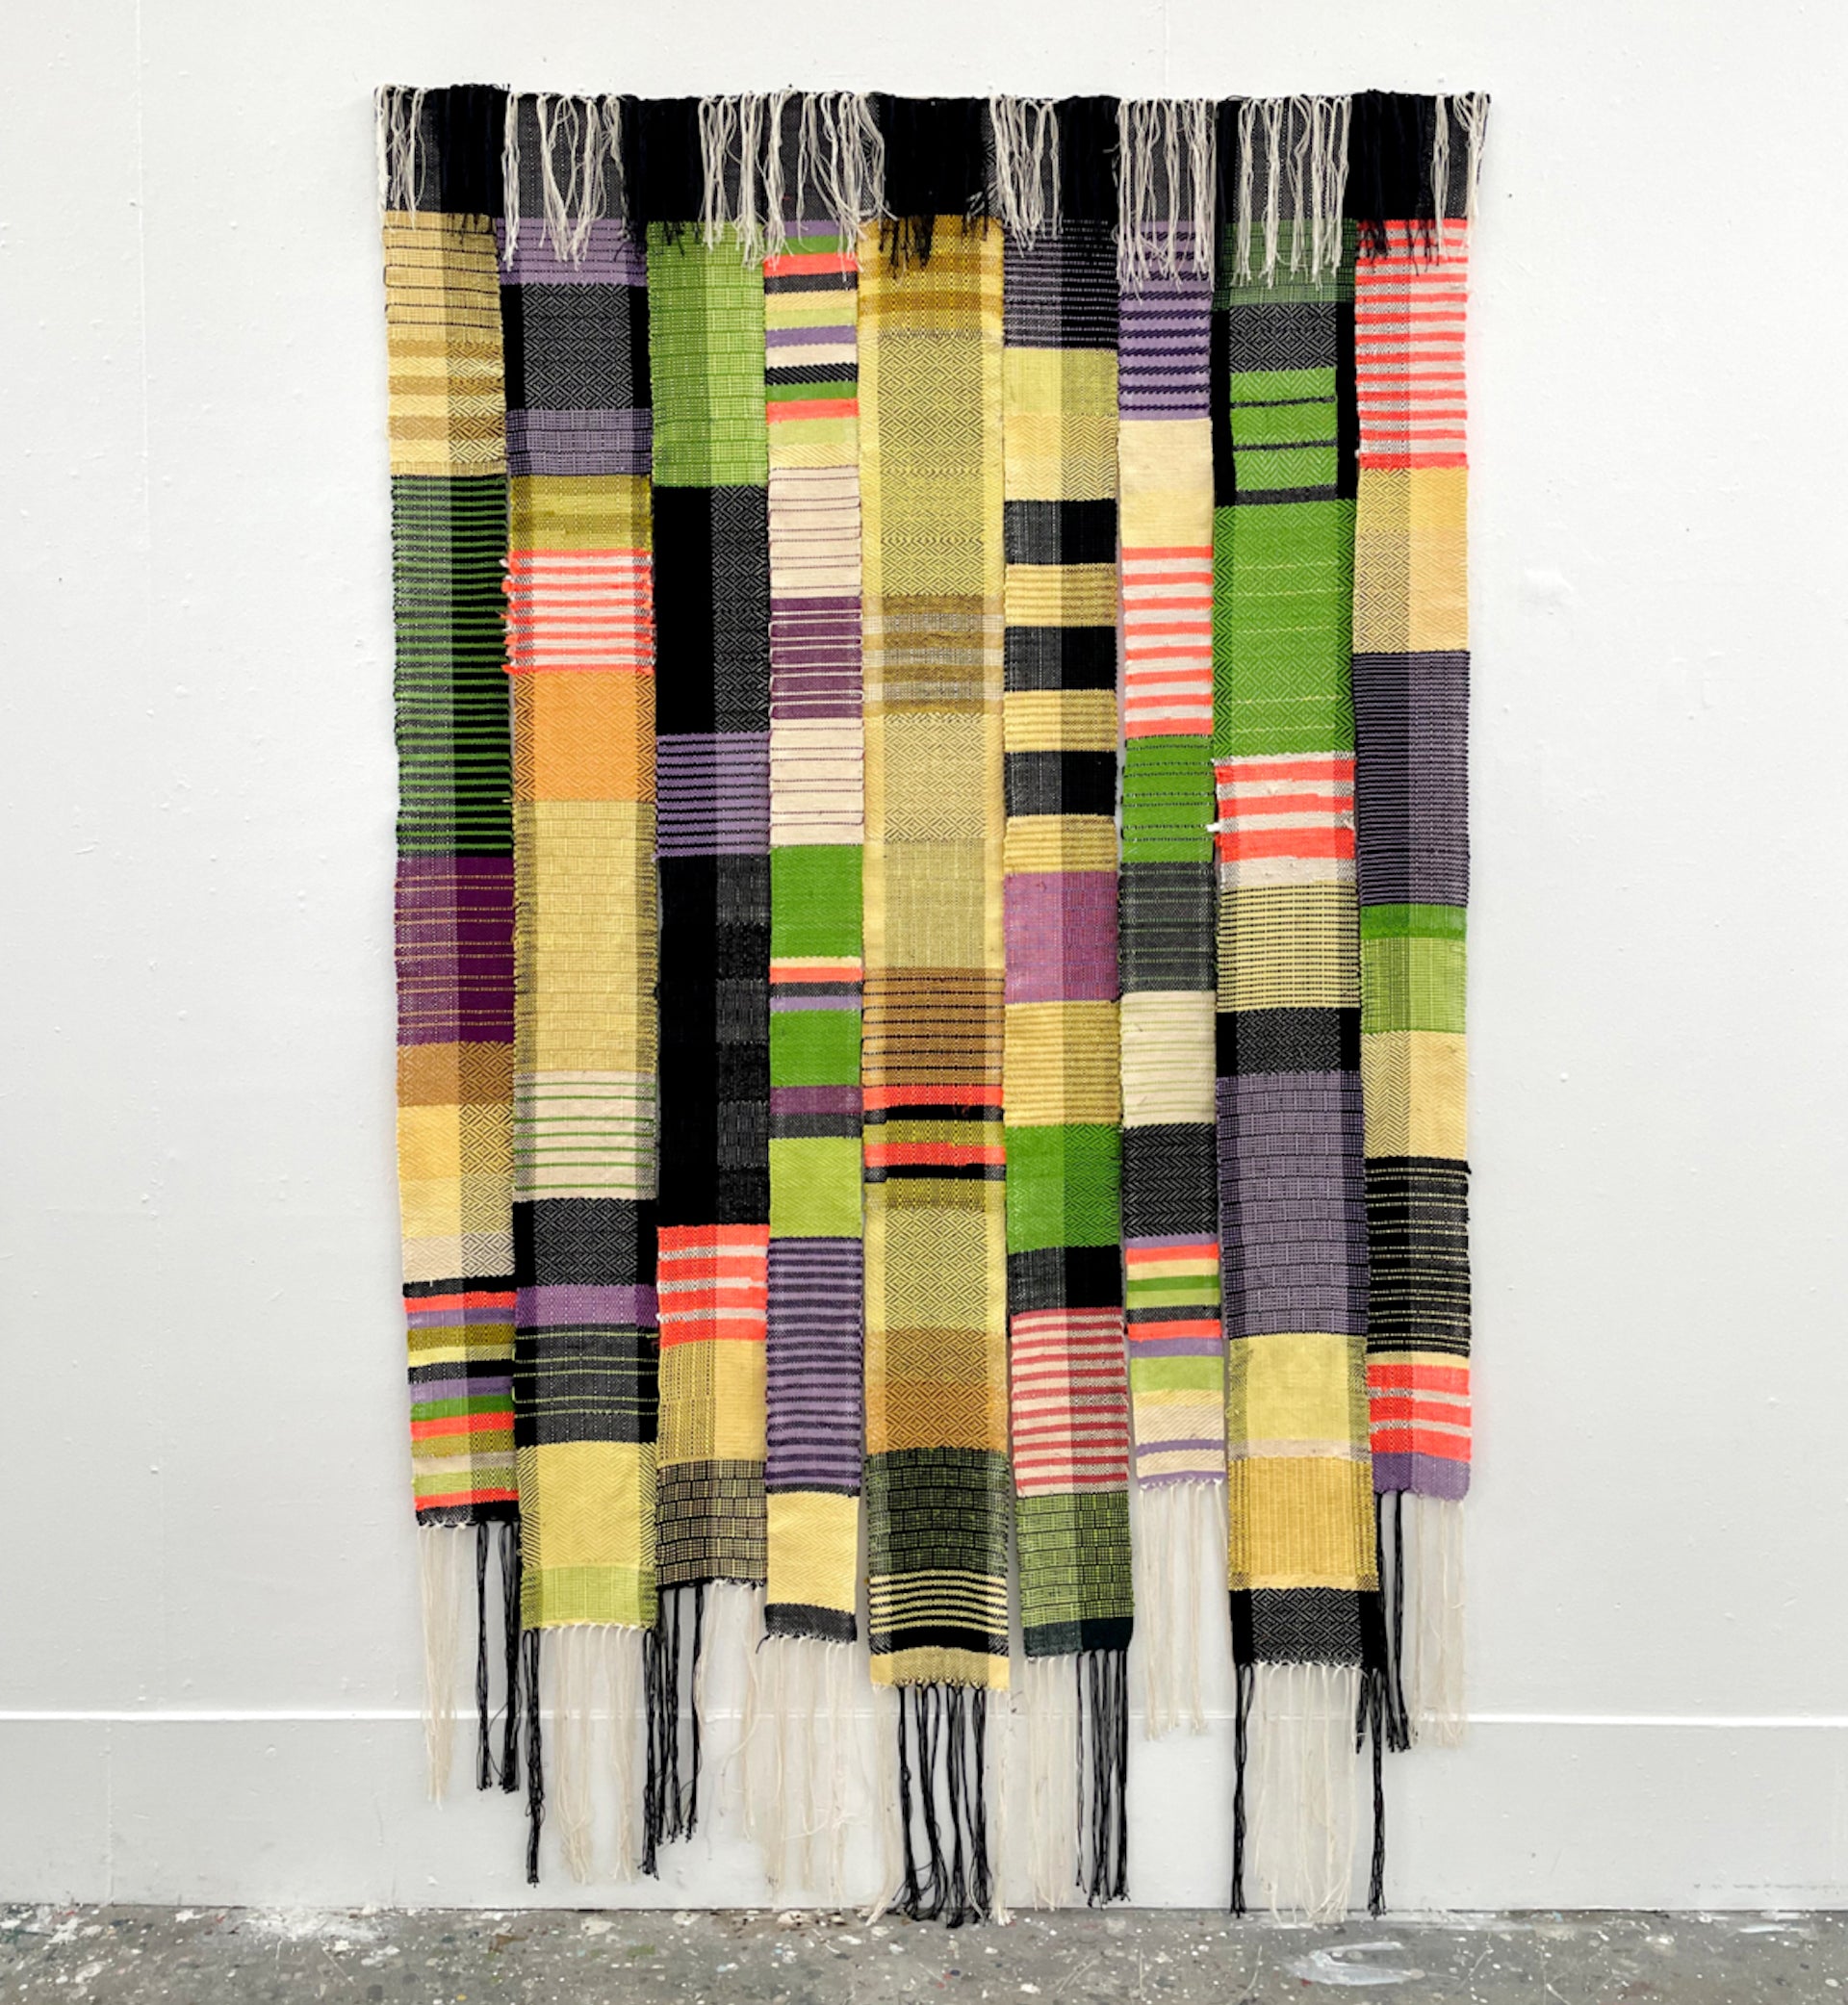 Home & Away by Paolo Arao, 2023. Hand-woven cotton, wool, acrylic, and synthetic fibers. Photo courtesy of Mindy Solomon Gallery and the artist